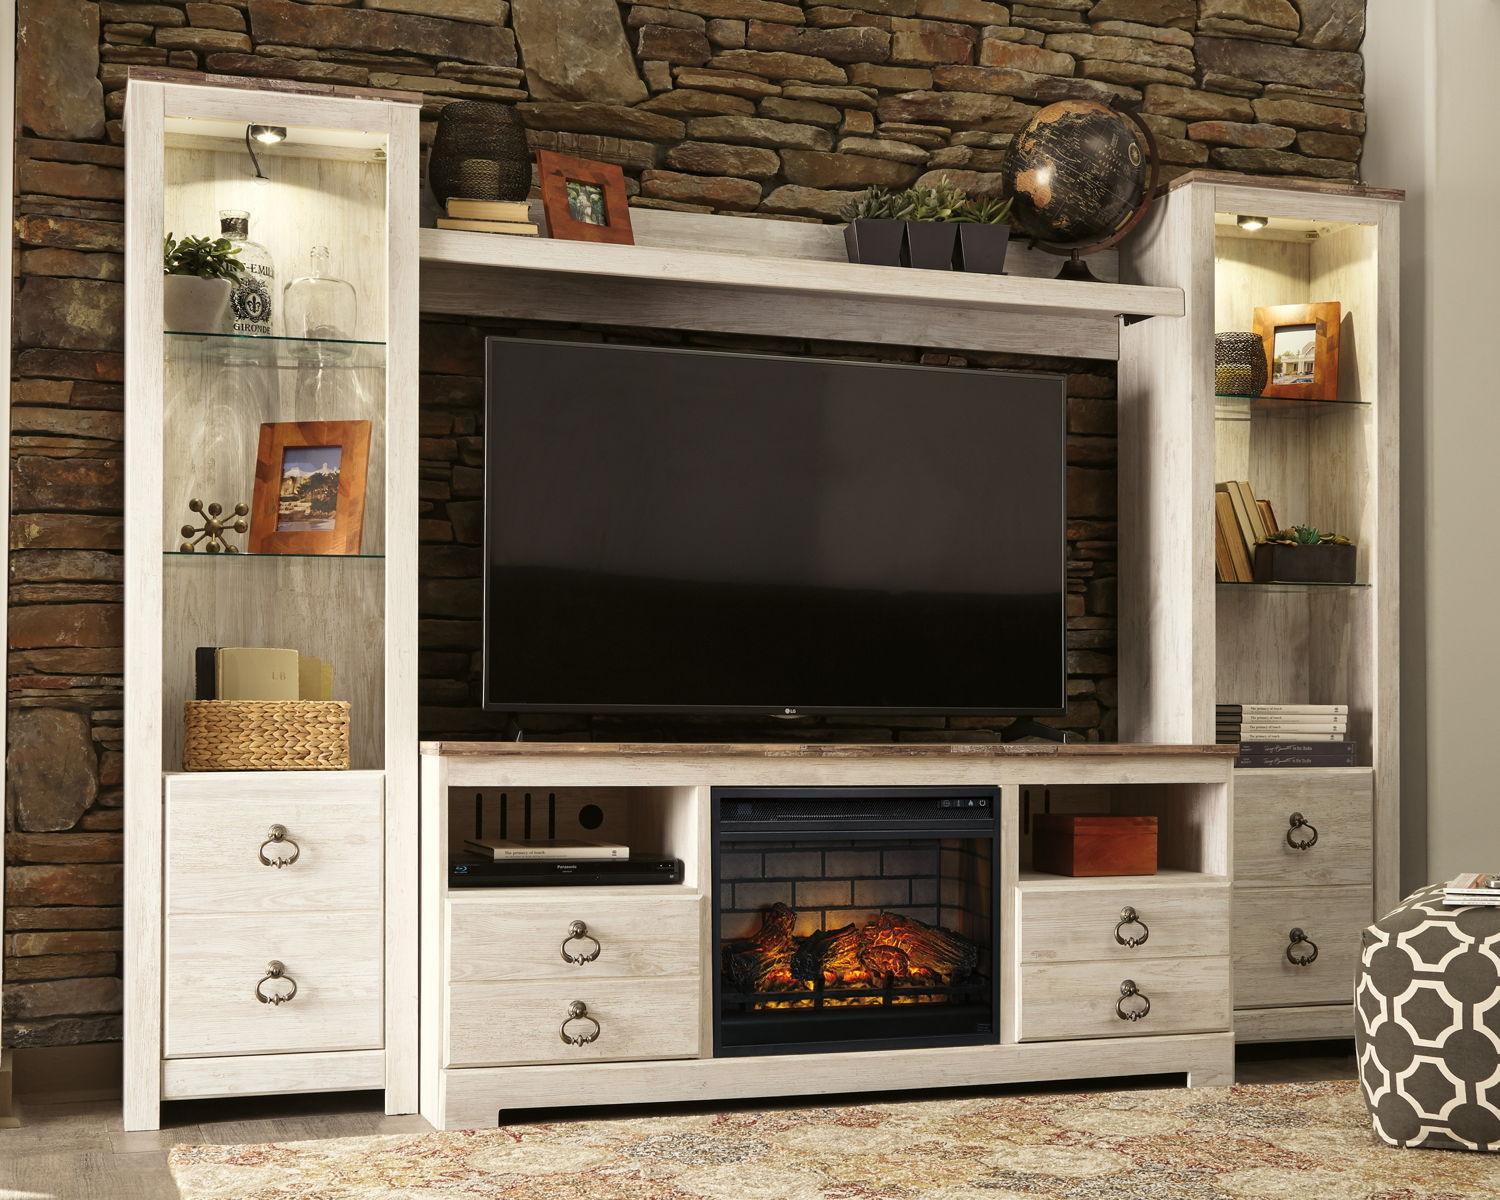 Signature Design by Ashley® - Willowton - Whitewash - Entertainment Center - TV Stand With Faux Firebrick Fireplace Insert - 5th Avenue Furniture